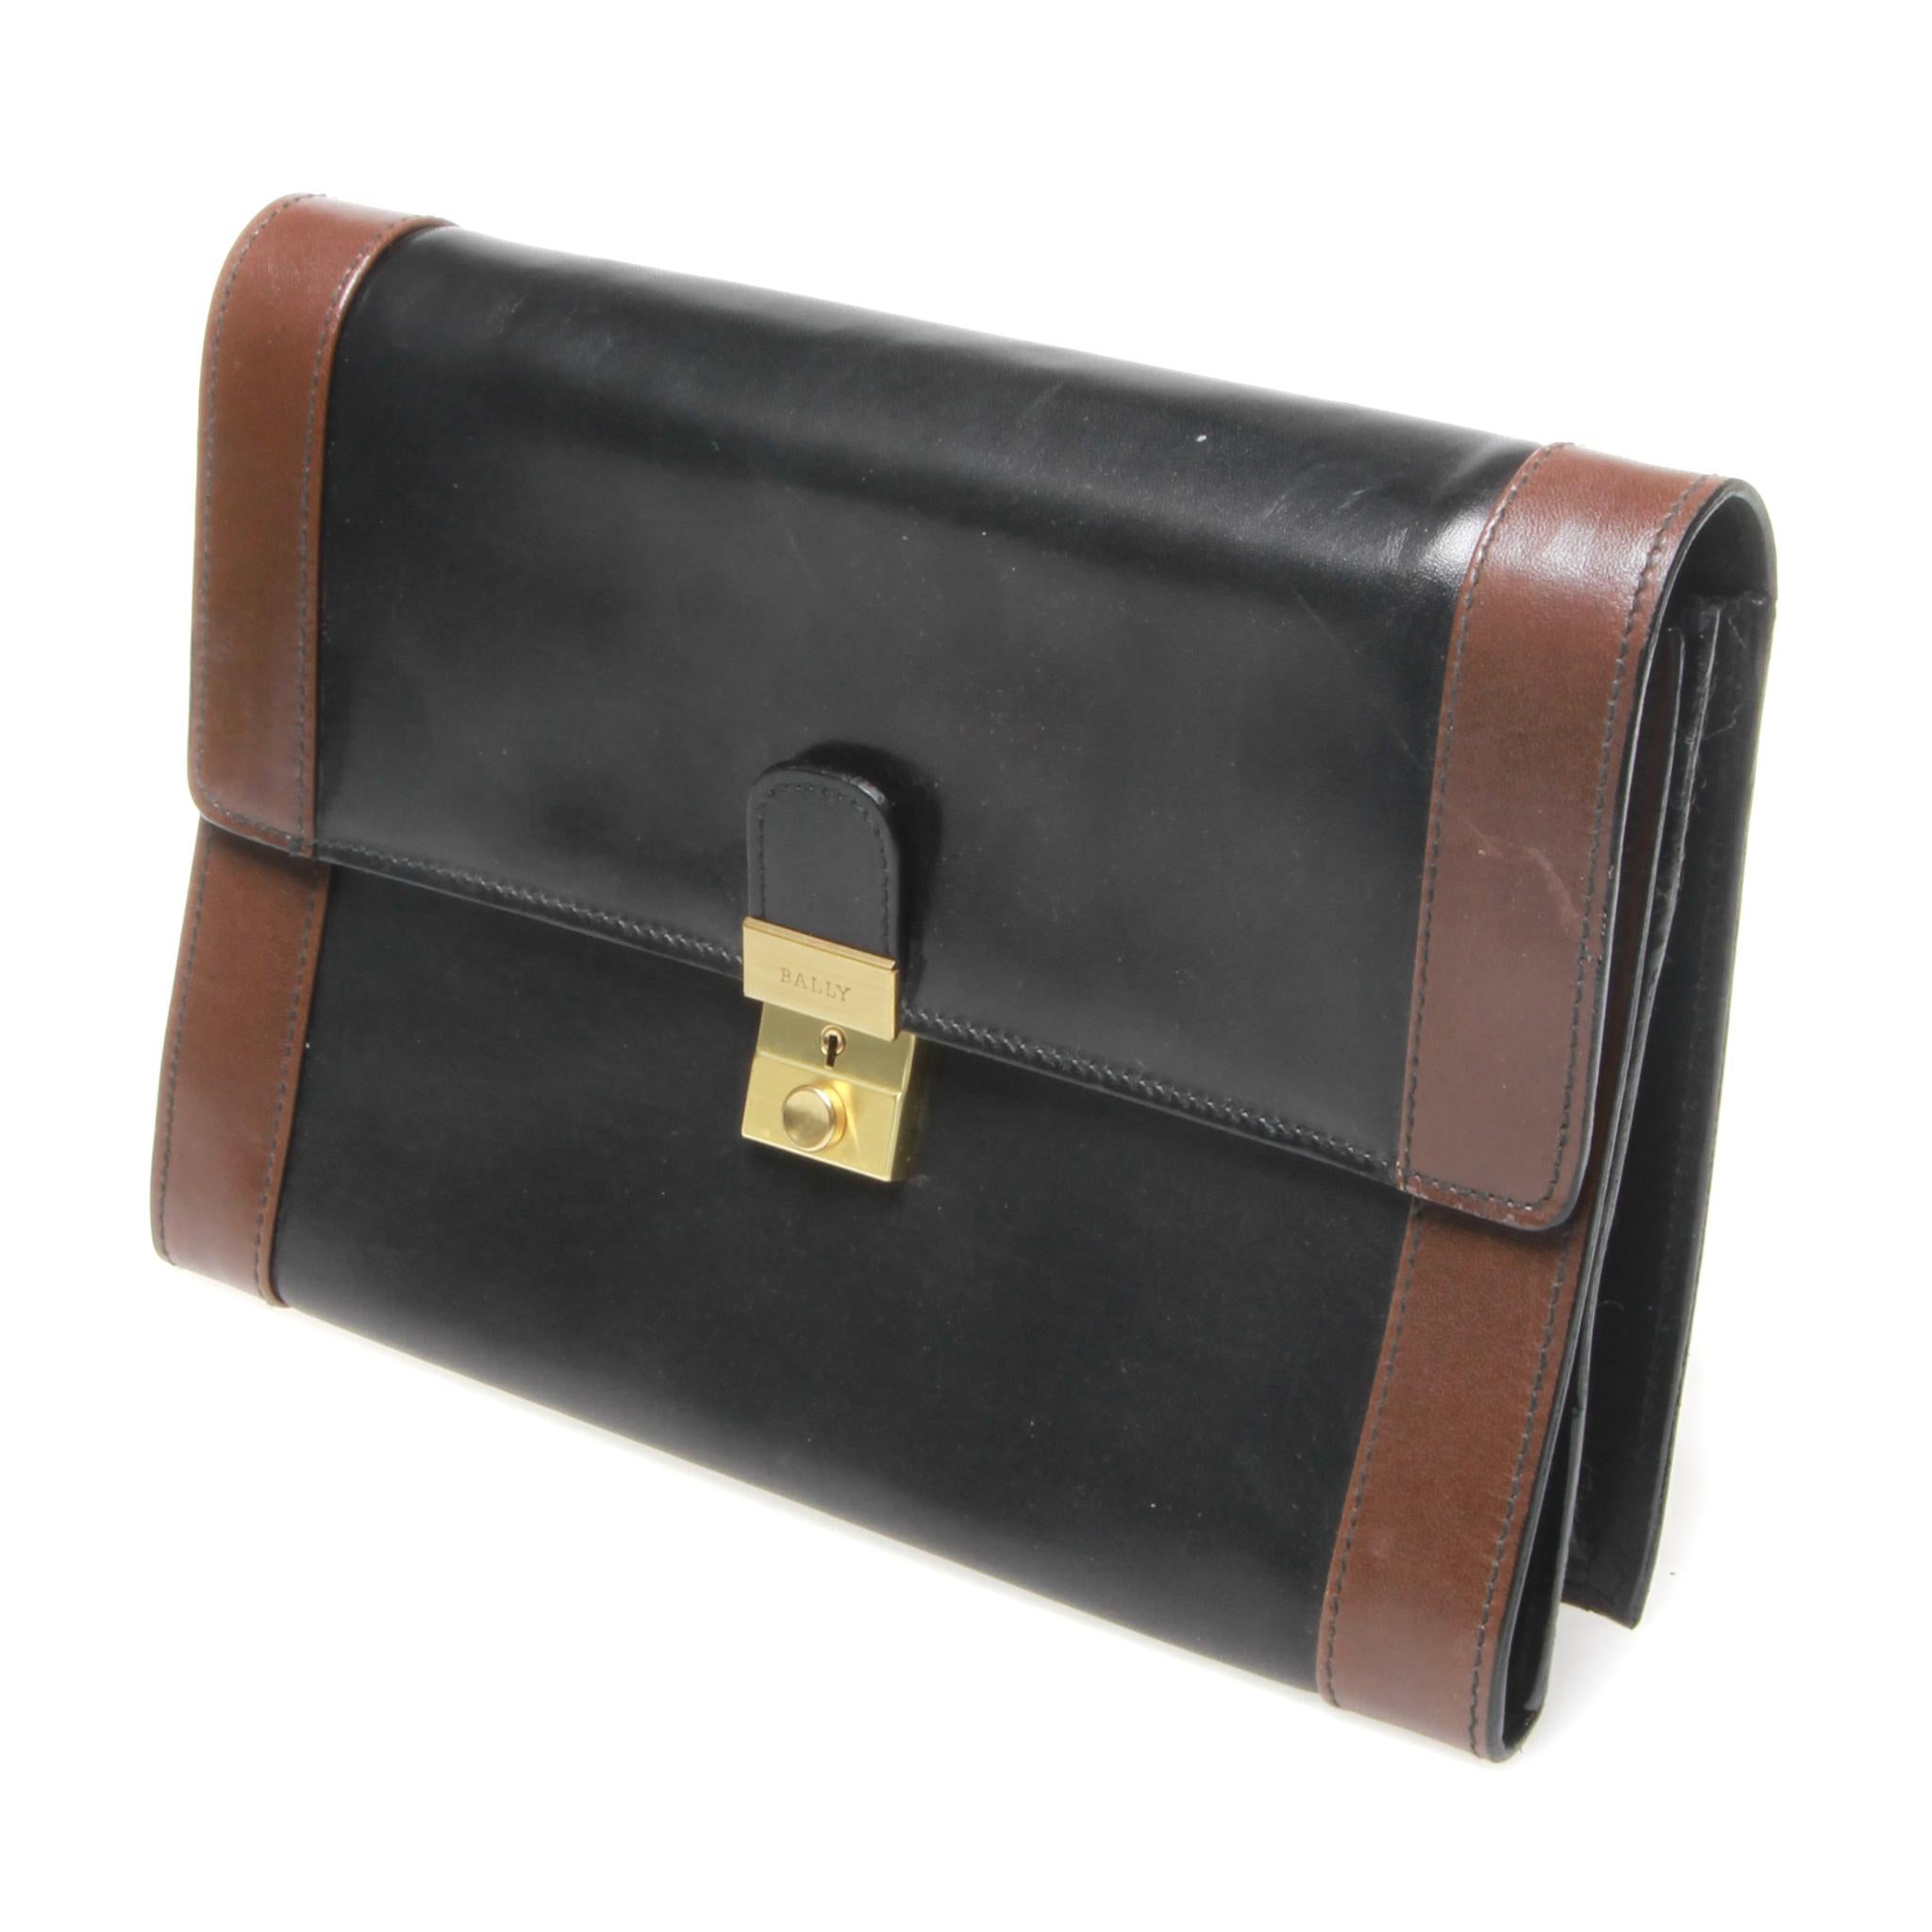 Bally leather clutch with pen